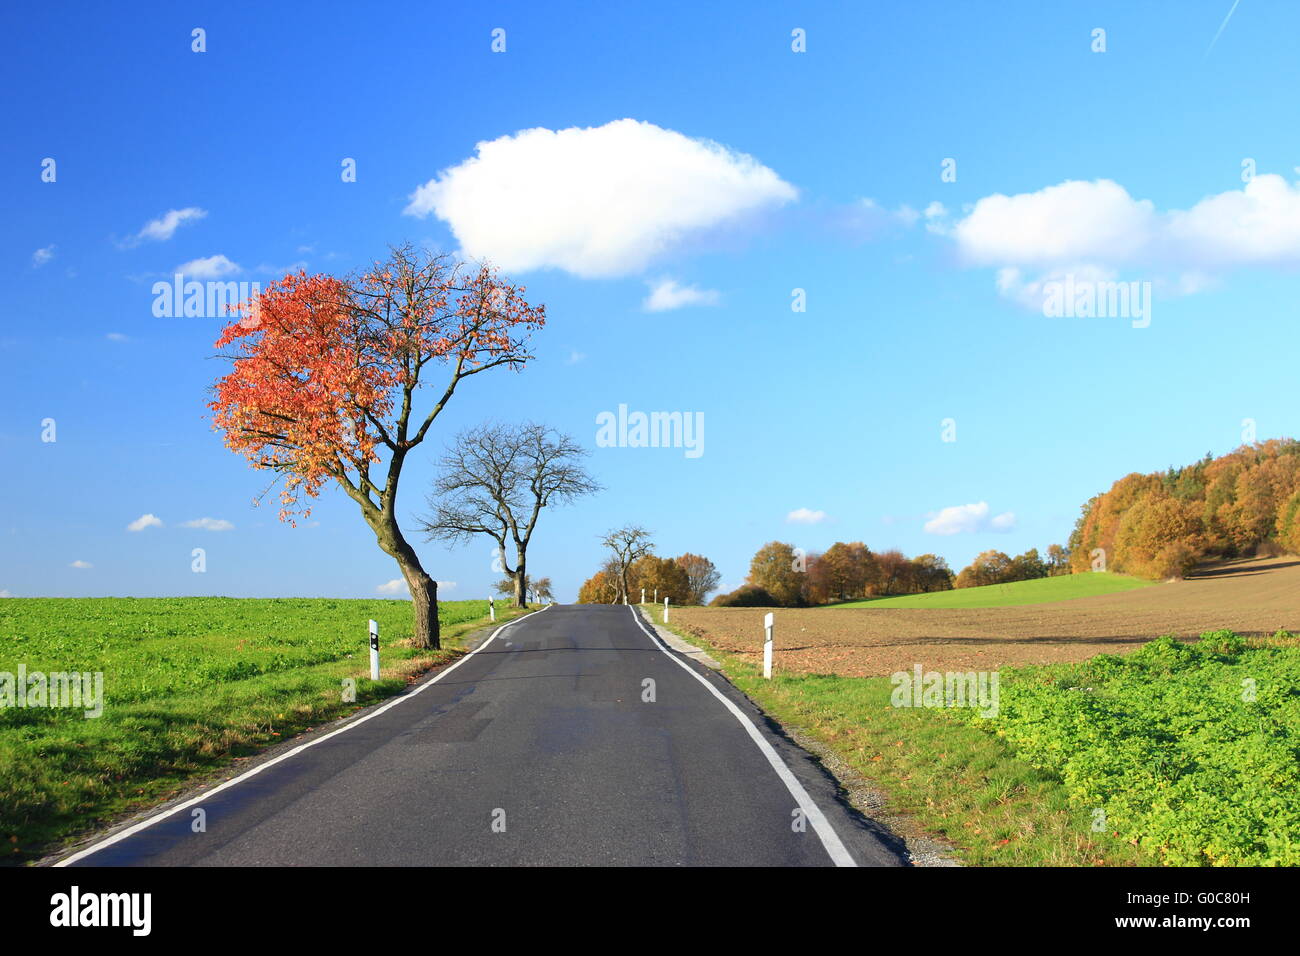 Autumn tree on a country road Stock Photo